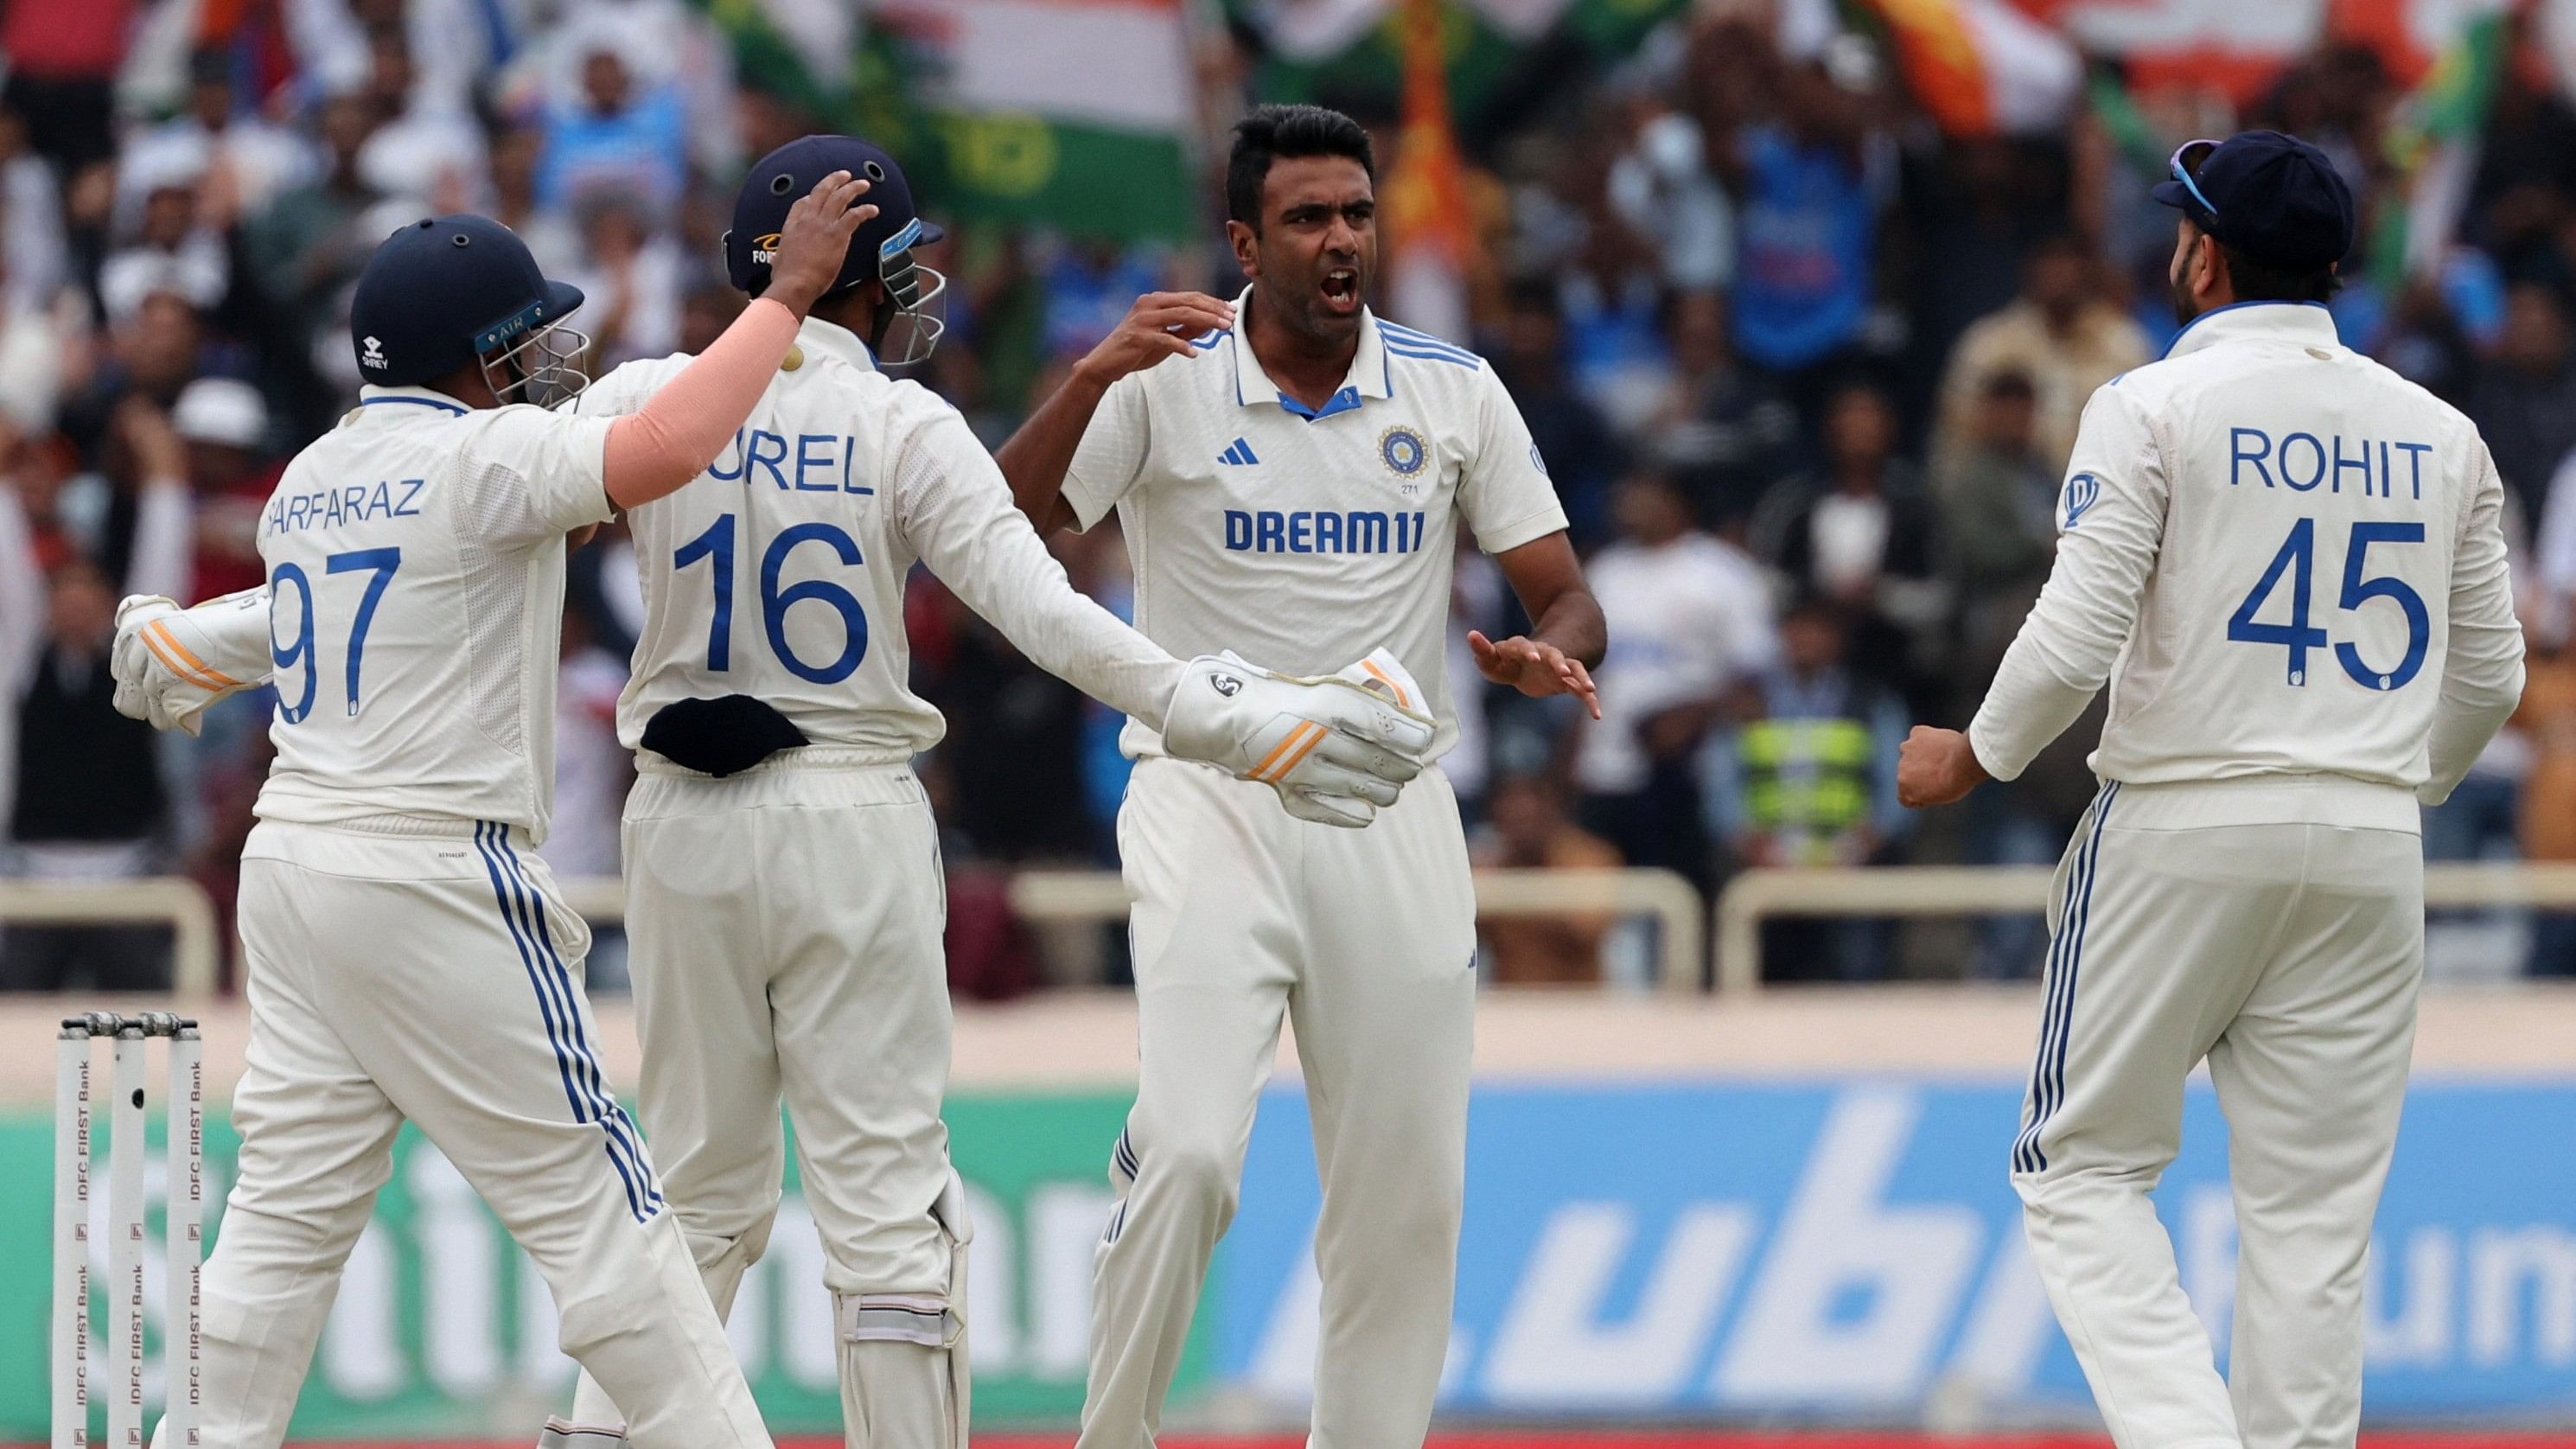 India's R Ashwin celebrates with team-mates after dismissing England's Ollie Pope on the third day of the fourth Test in Ranchi pn Sunday. Reuters